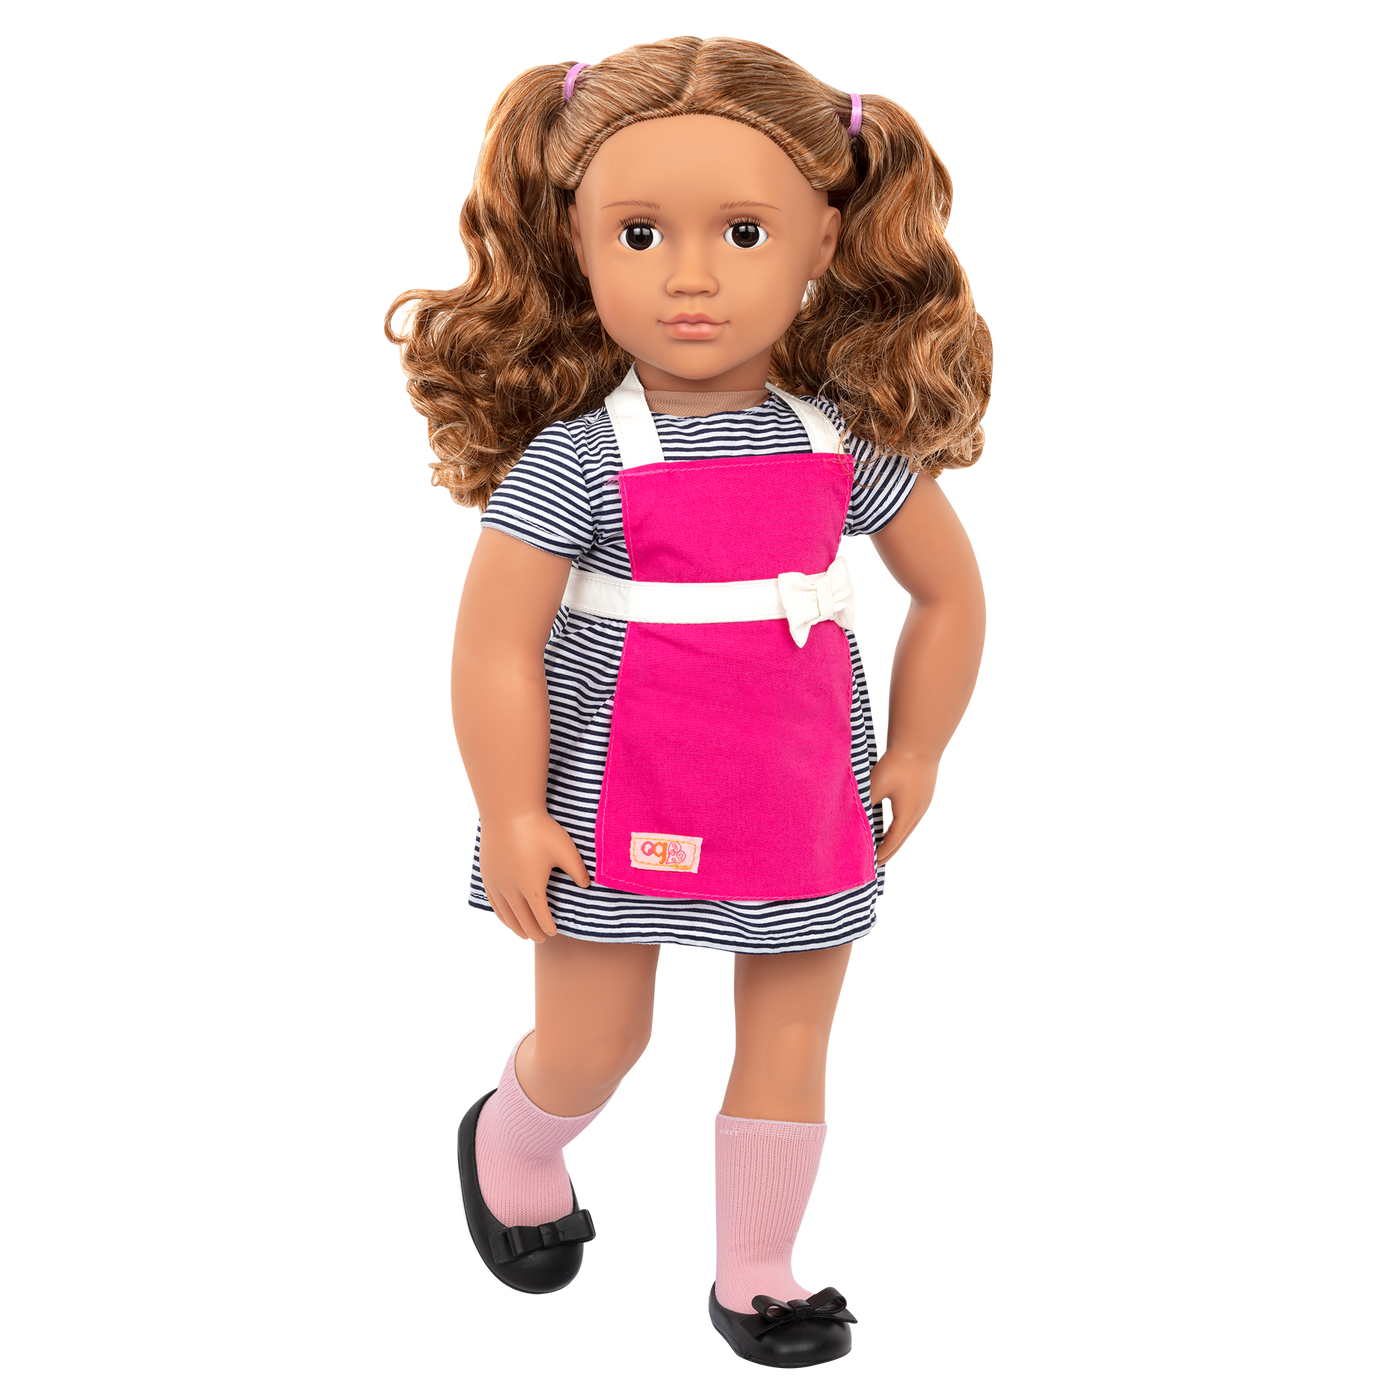 18-inch doll with light-brown hair, brown eyes, diner accessories and storybook